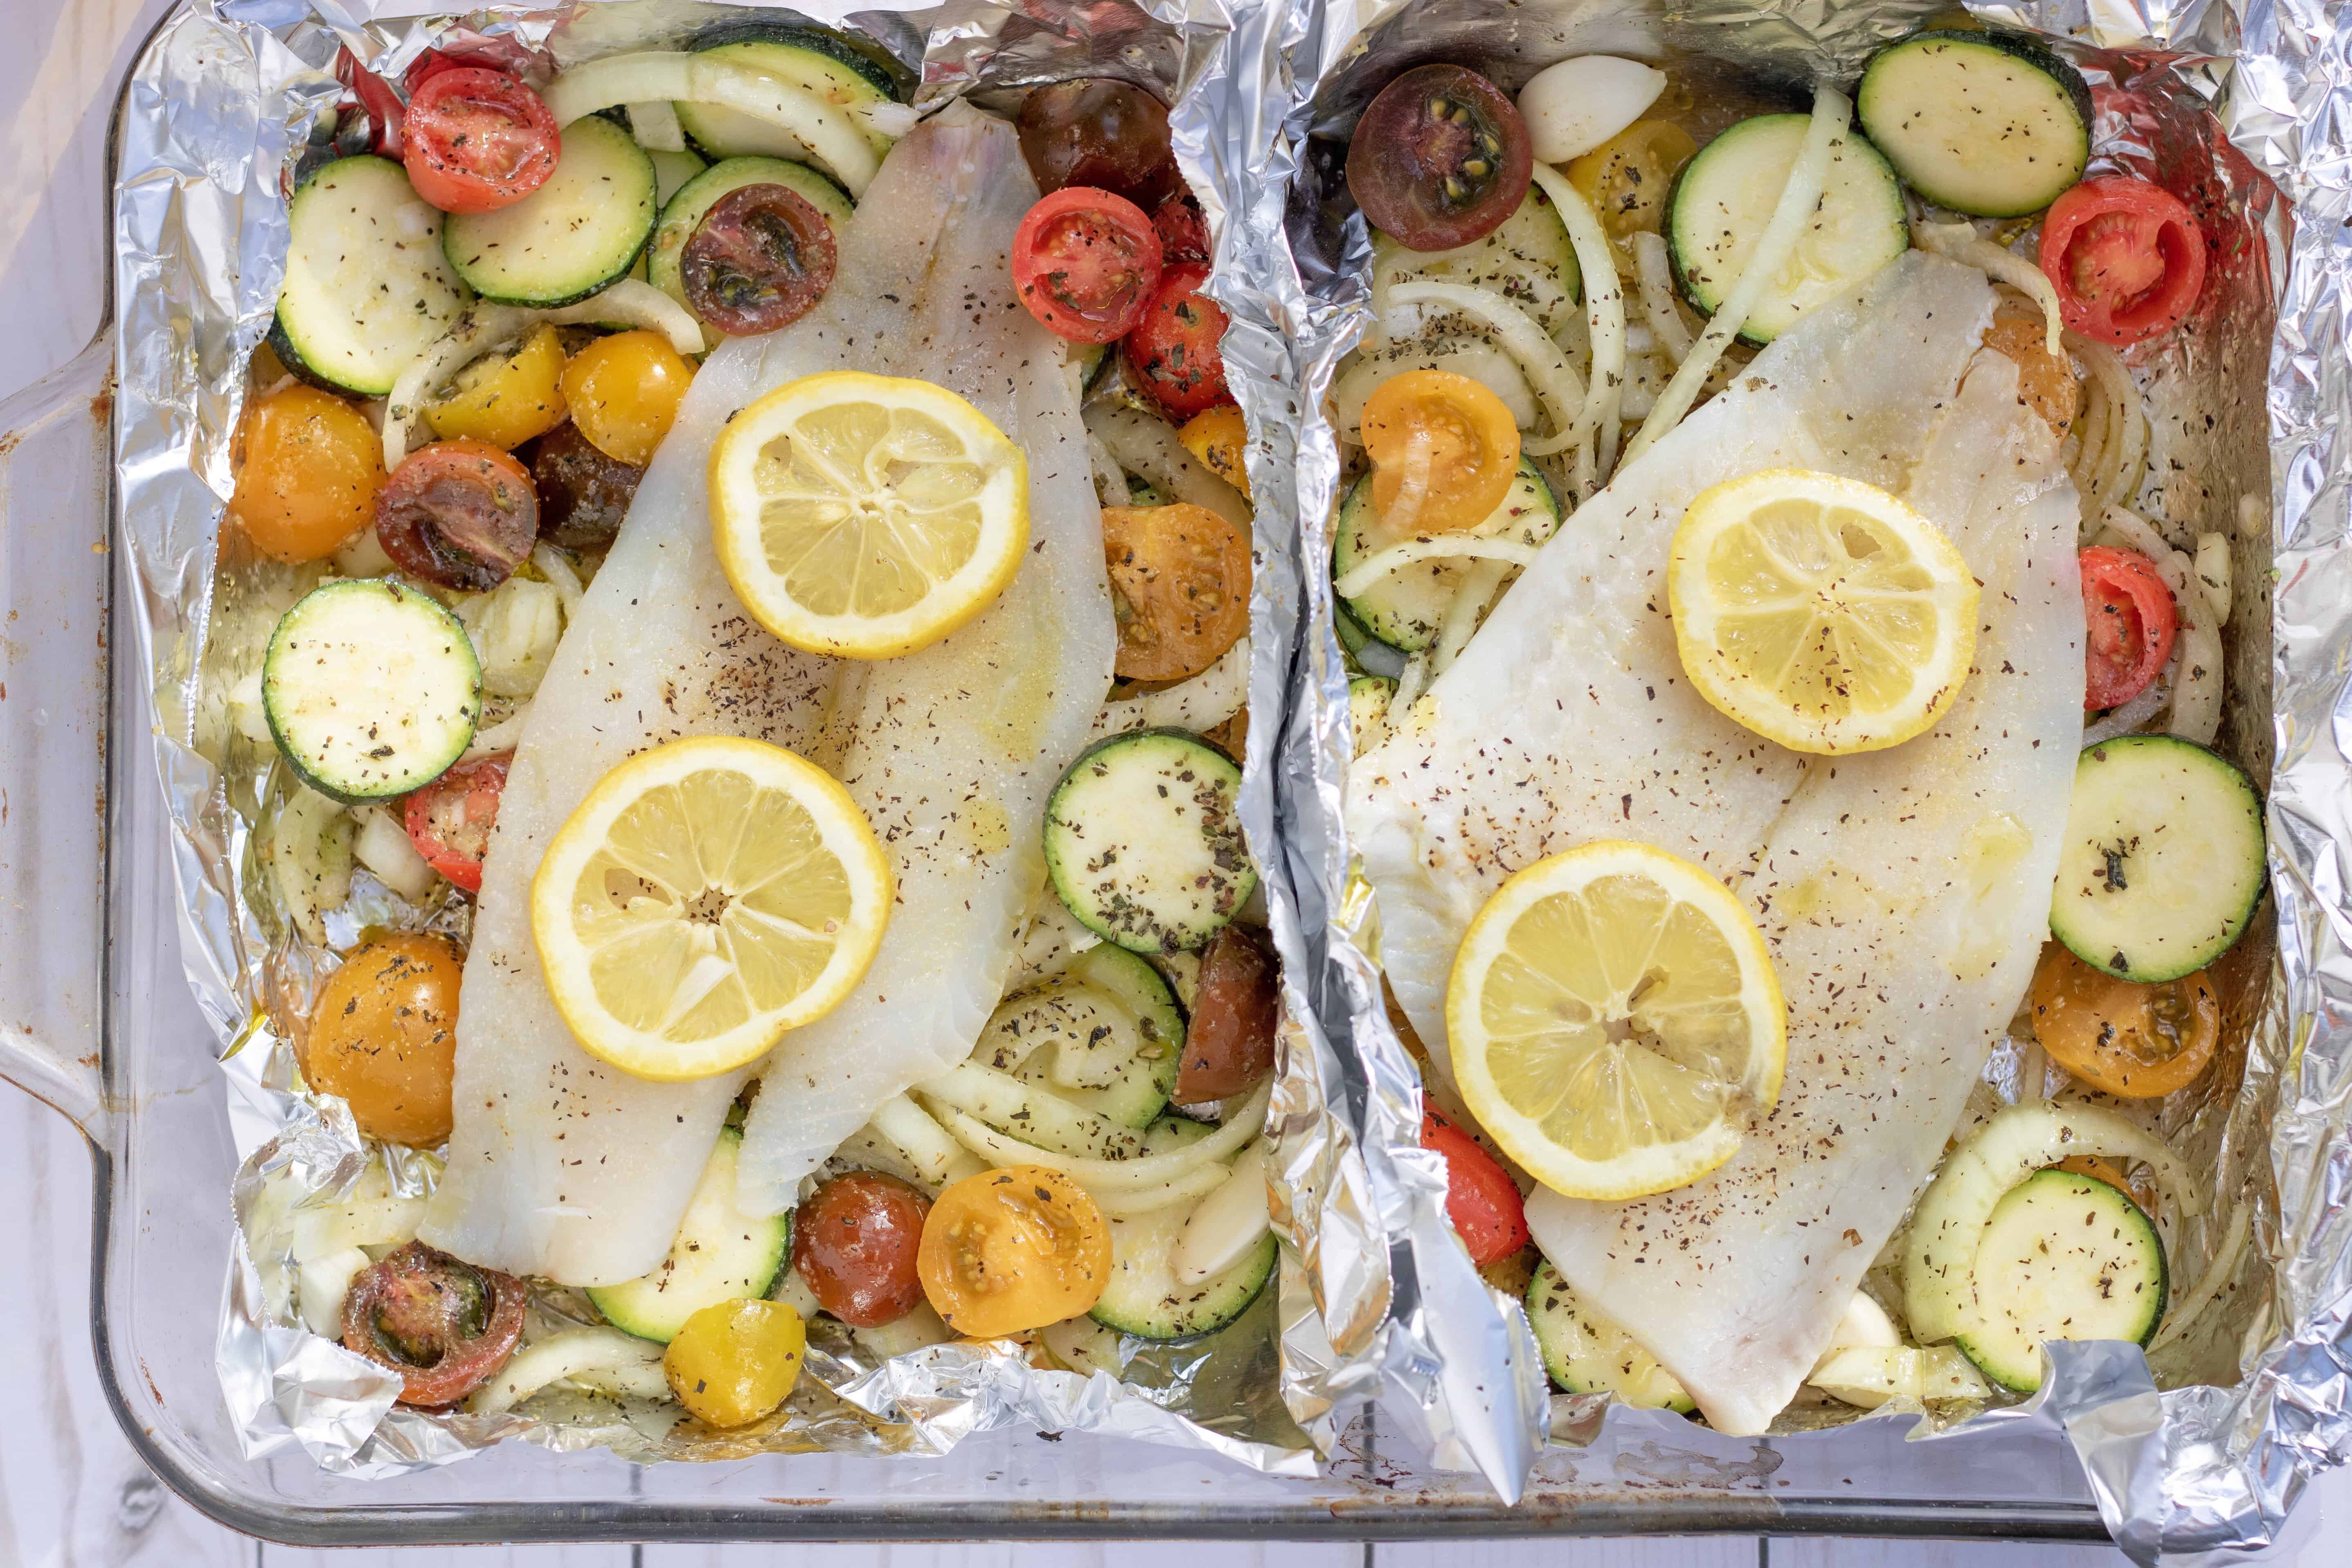 A glass 13x9” baking dish with two foil packets that are filled with vegetables and topped with white fish. It’s to be baked in the oven for an easy family dinner that’s healthy and quick to make. It’s got vibrant colorful cherry tomatoes, sliced zucchini and onions.